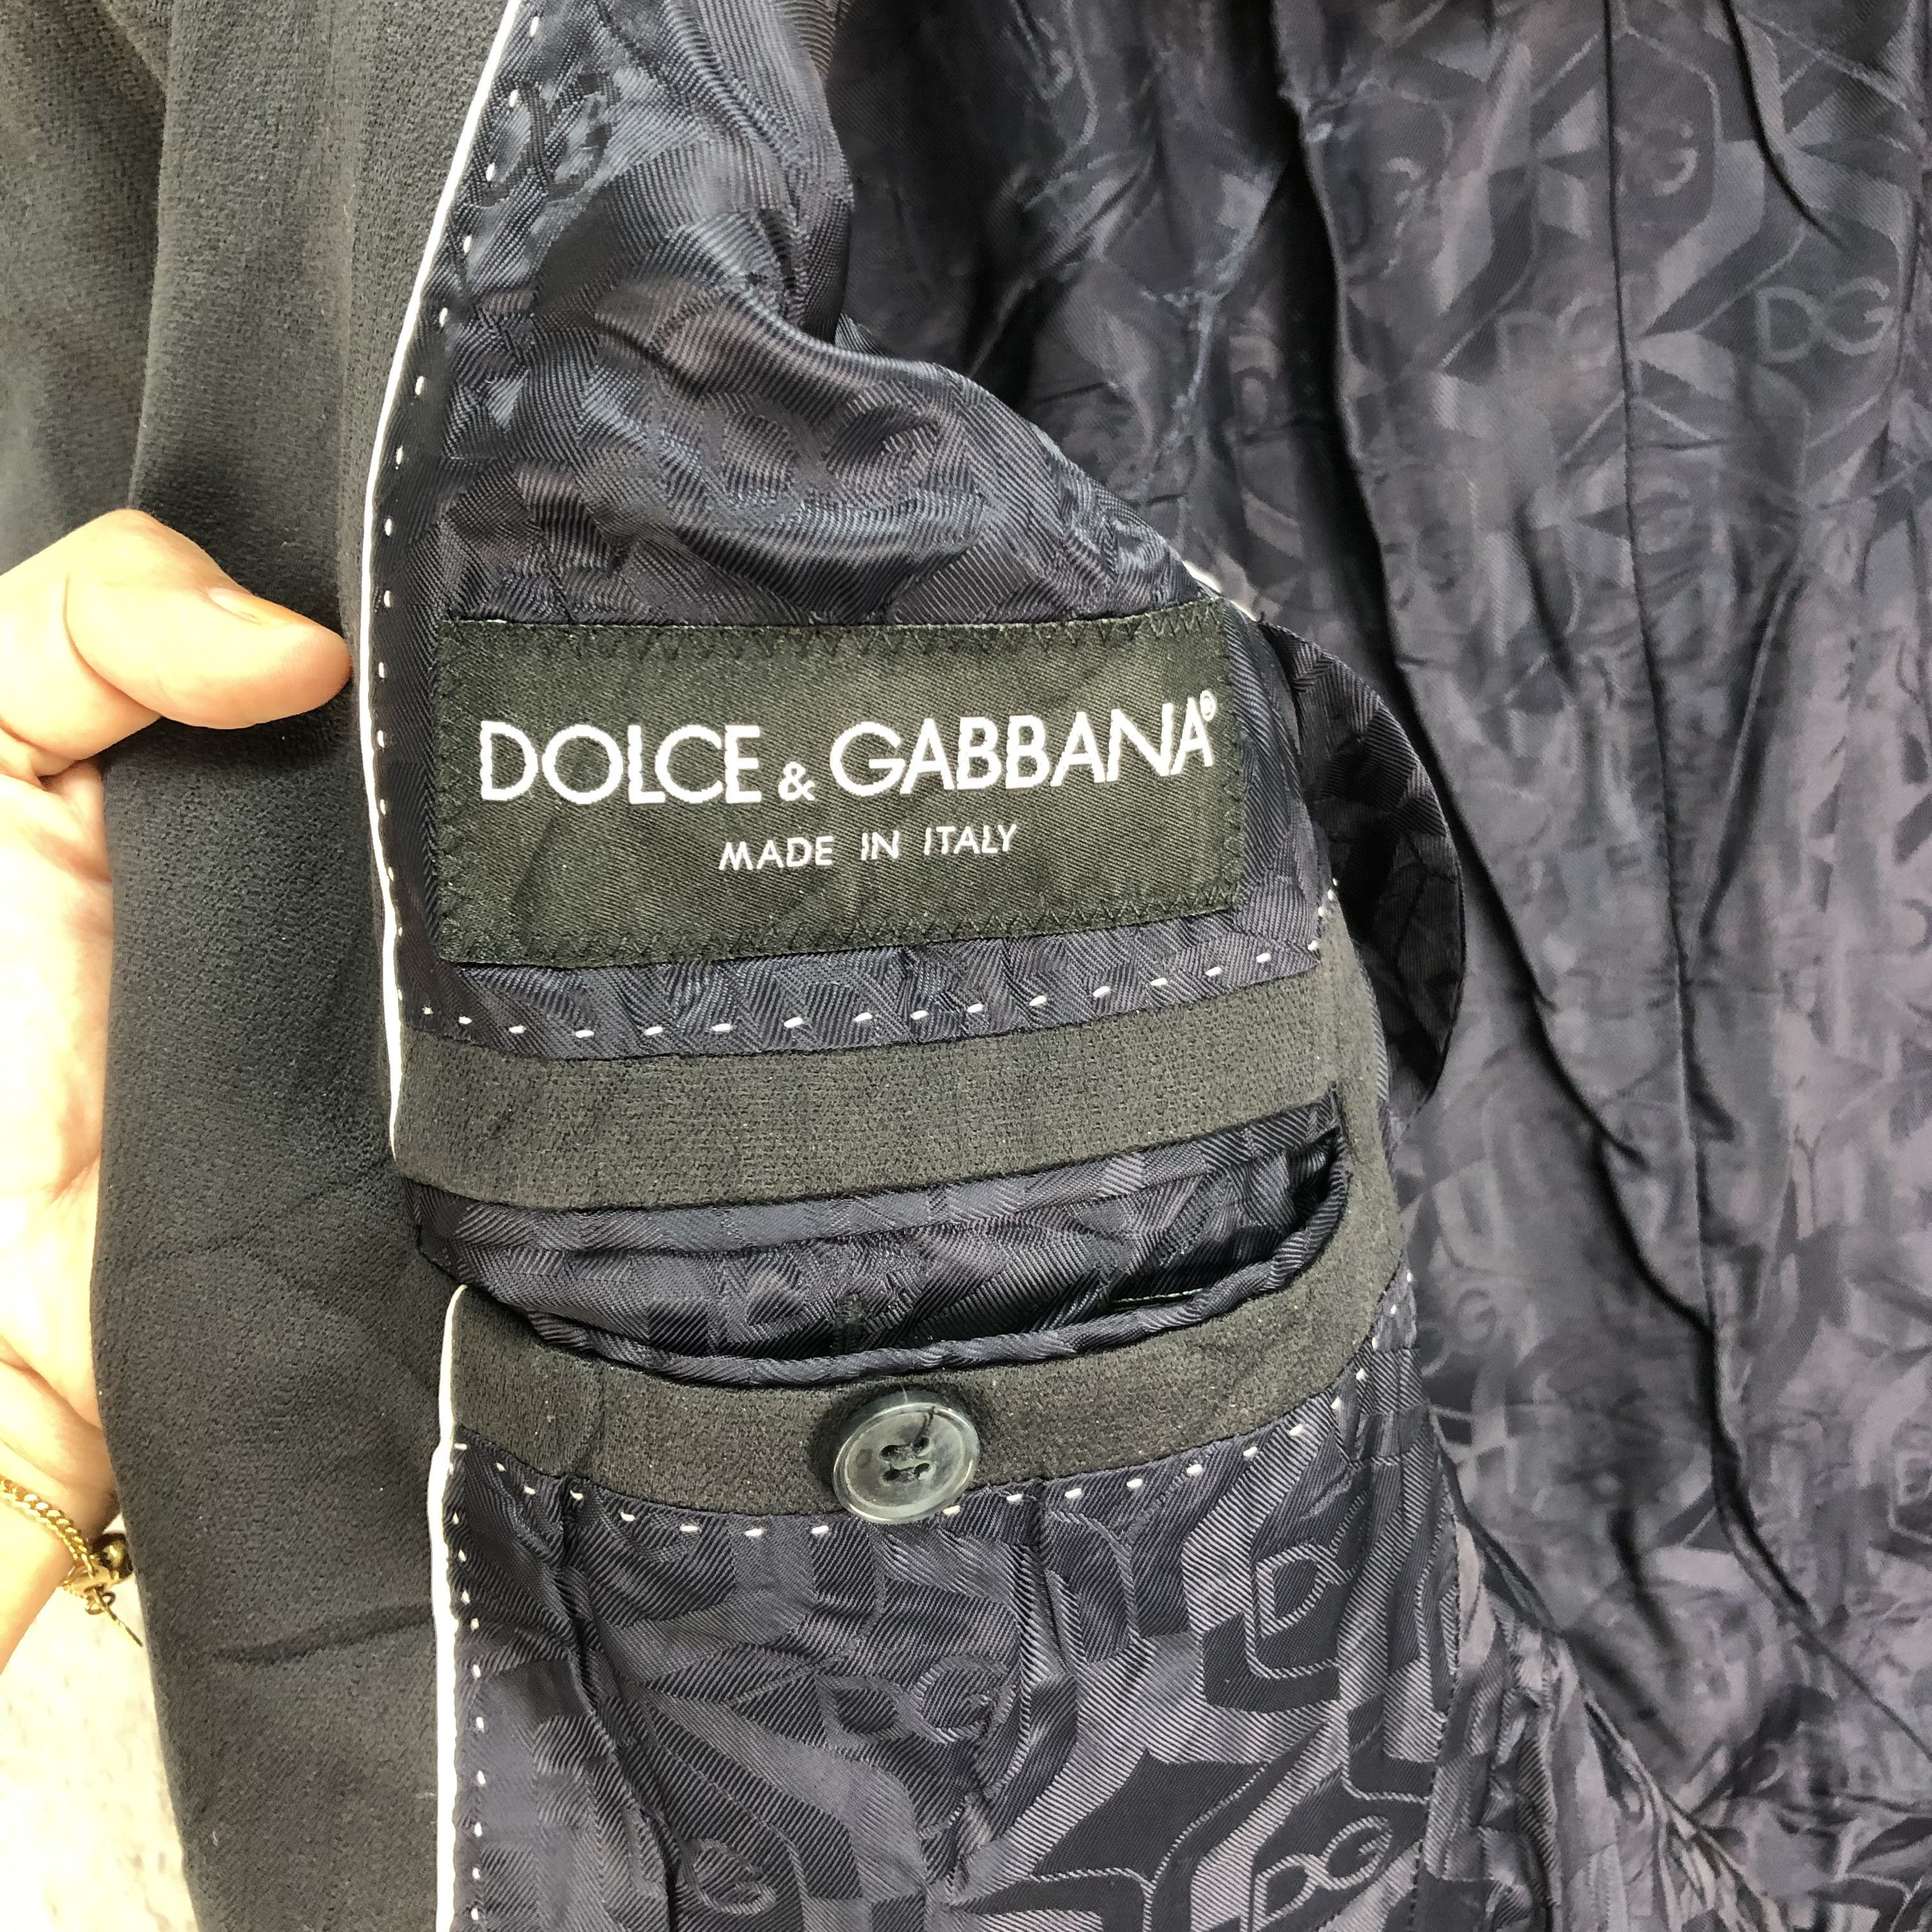 Dolce & Gabbana Made in Italy Suits Jacket #4565-159 - 8